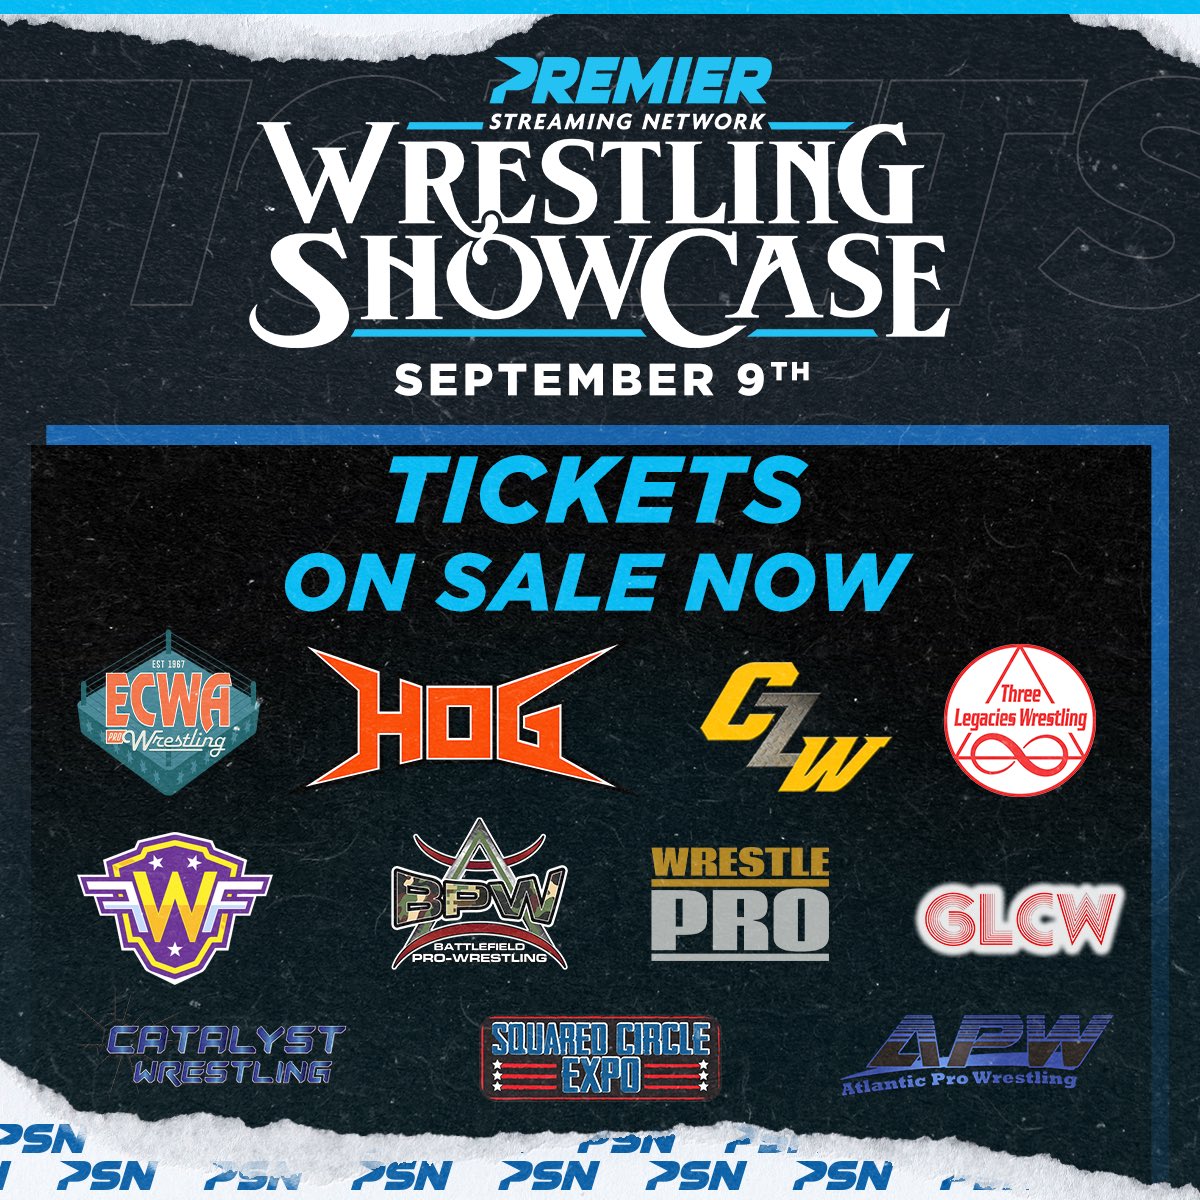 🚨ON SALE NOW🚨 Tickets to The Wrestling Showcase are available now! Live from Metuchen, NJ, every match features a different promotion! Many titles on the line, including the first ever men’s and women’s Premier championships! Get you tickets here ➡️ bit.ly/3BNSX5V